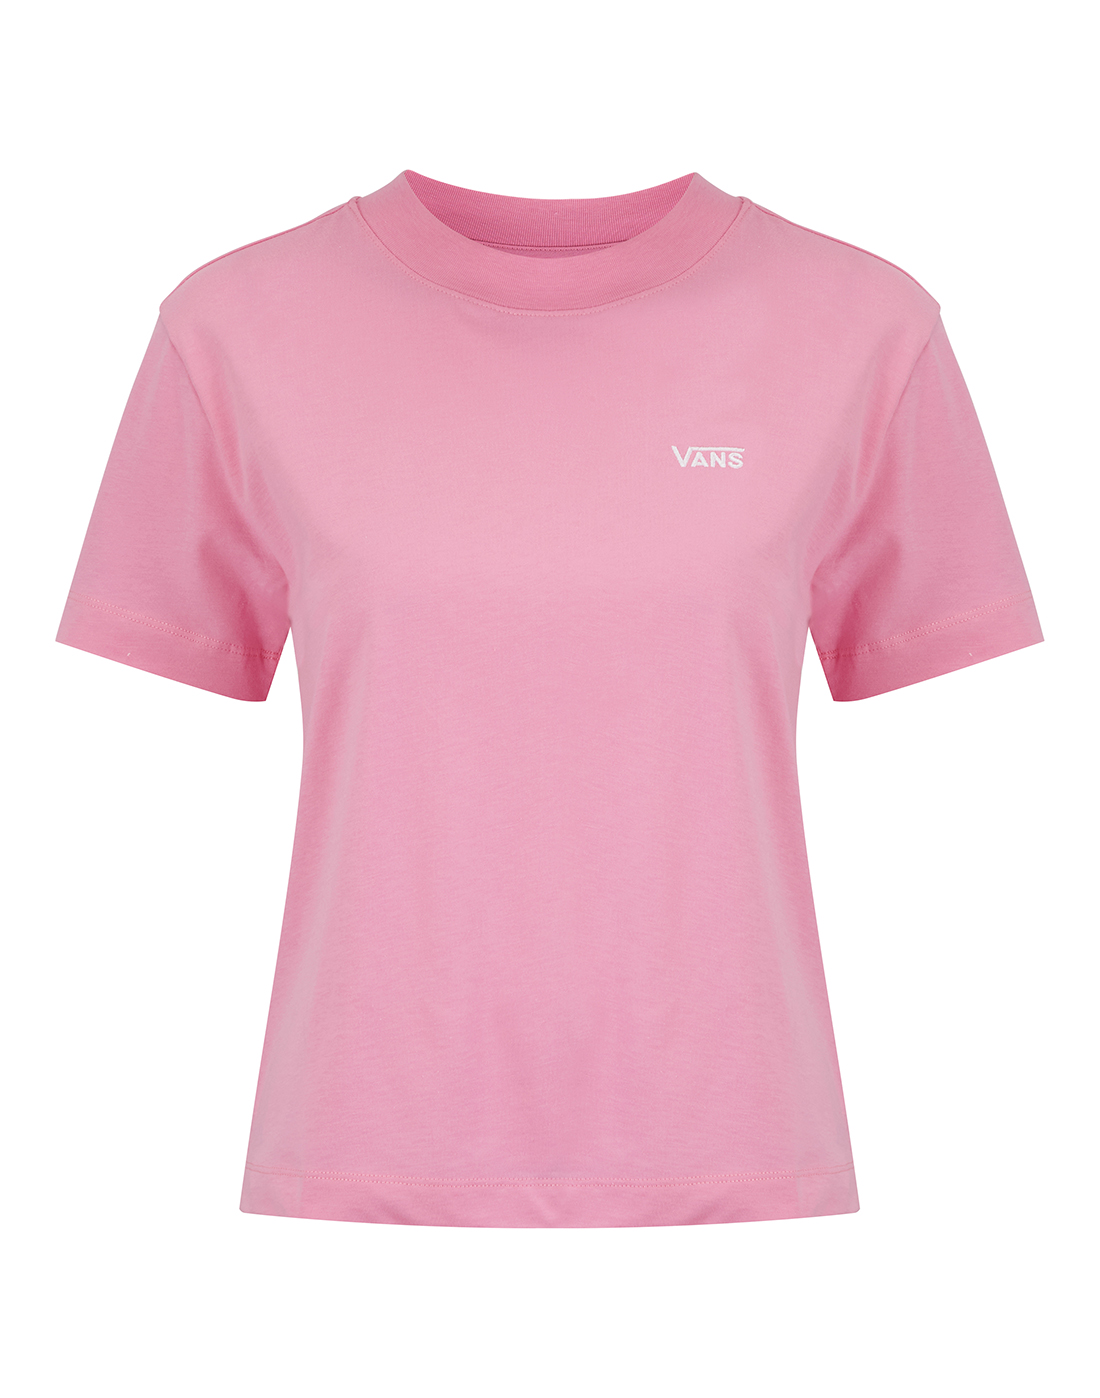 Vans Womens Boxy T-shirt - Pink | Life Style Sports IE